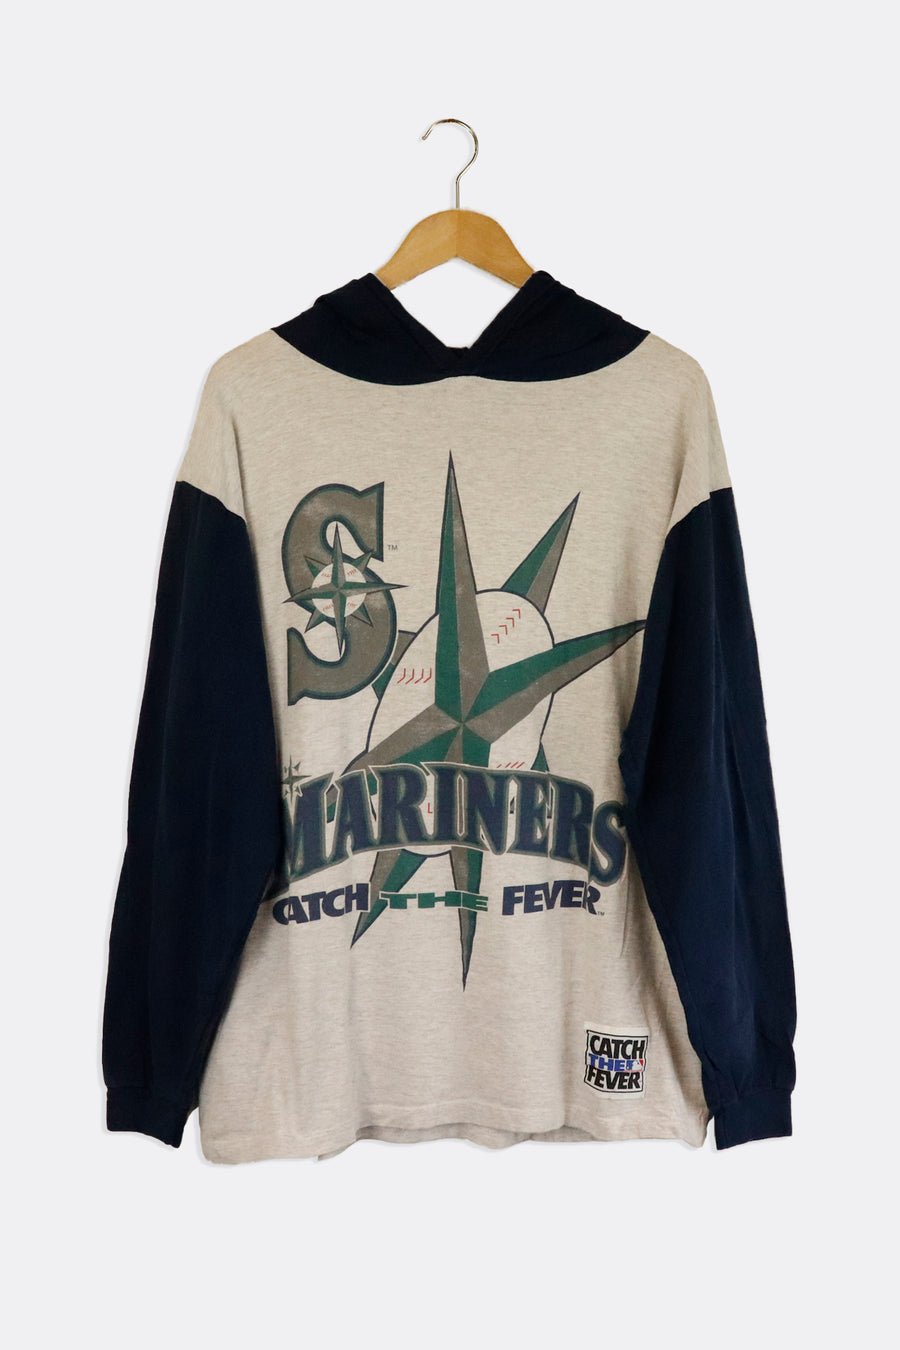 Vintage Seattle Mariners Catch The Fever Hooded Longsleeve T Shirt Sz L